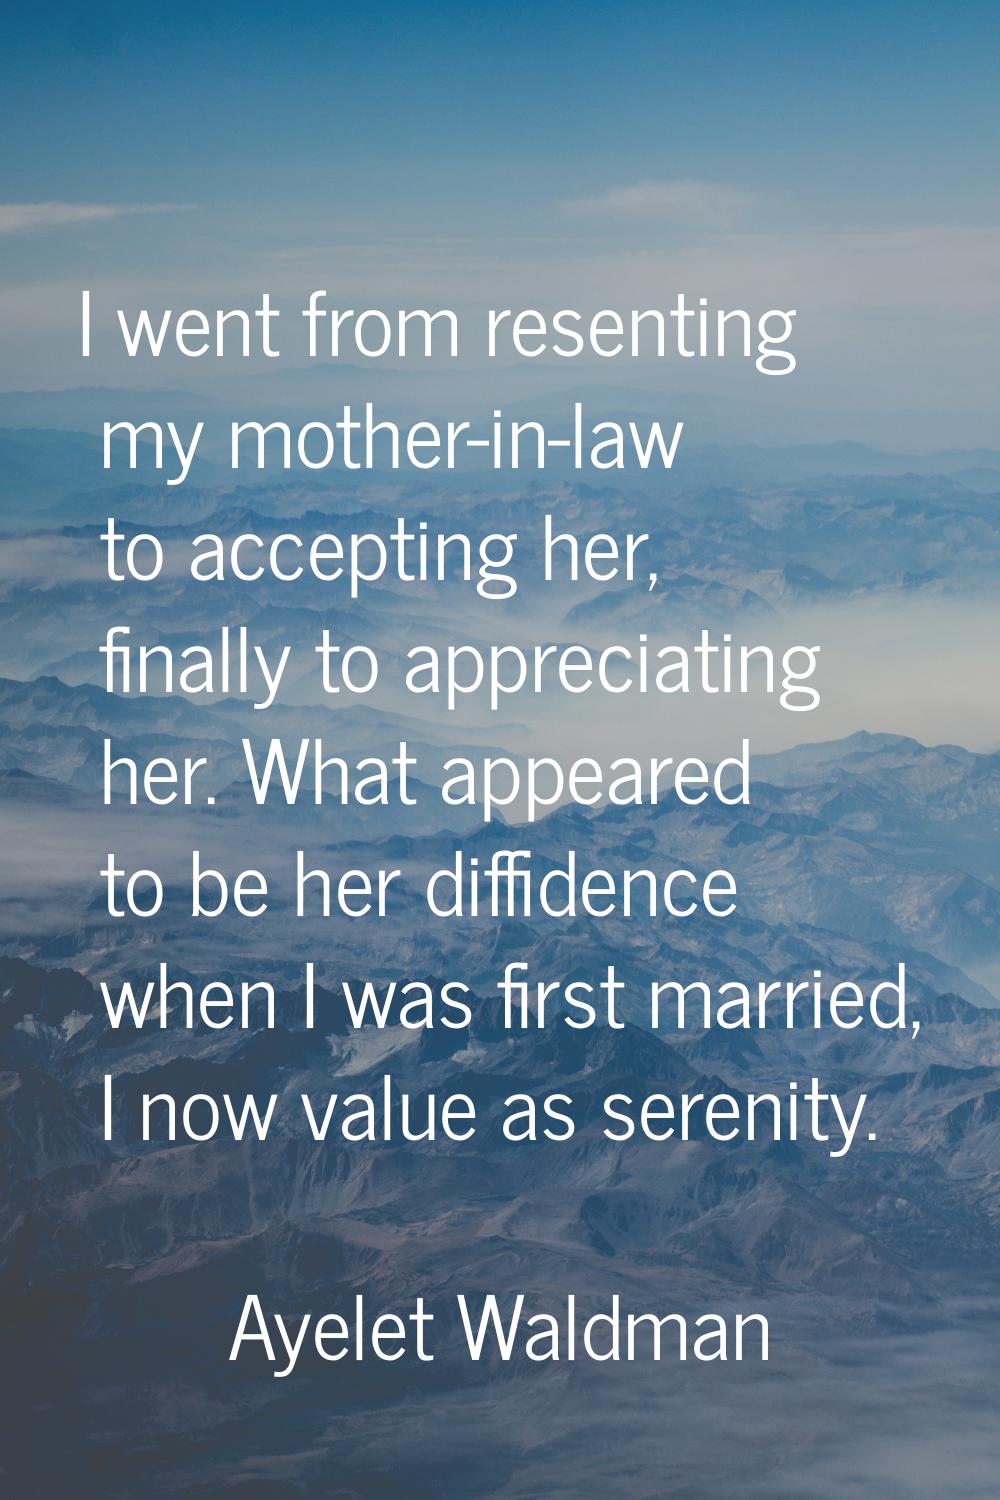 I went from resenting my mother-in-law to accepting her, finally to appreciating her. What appeared